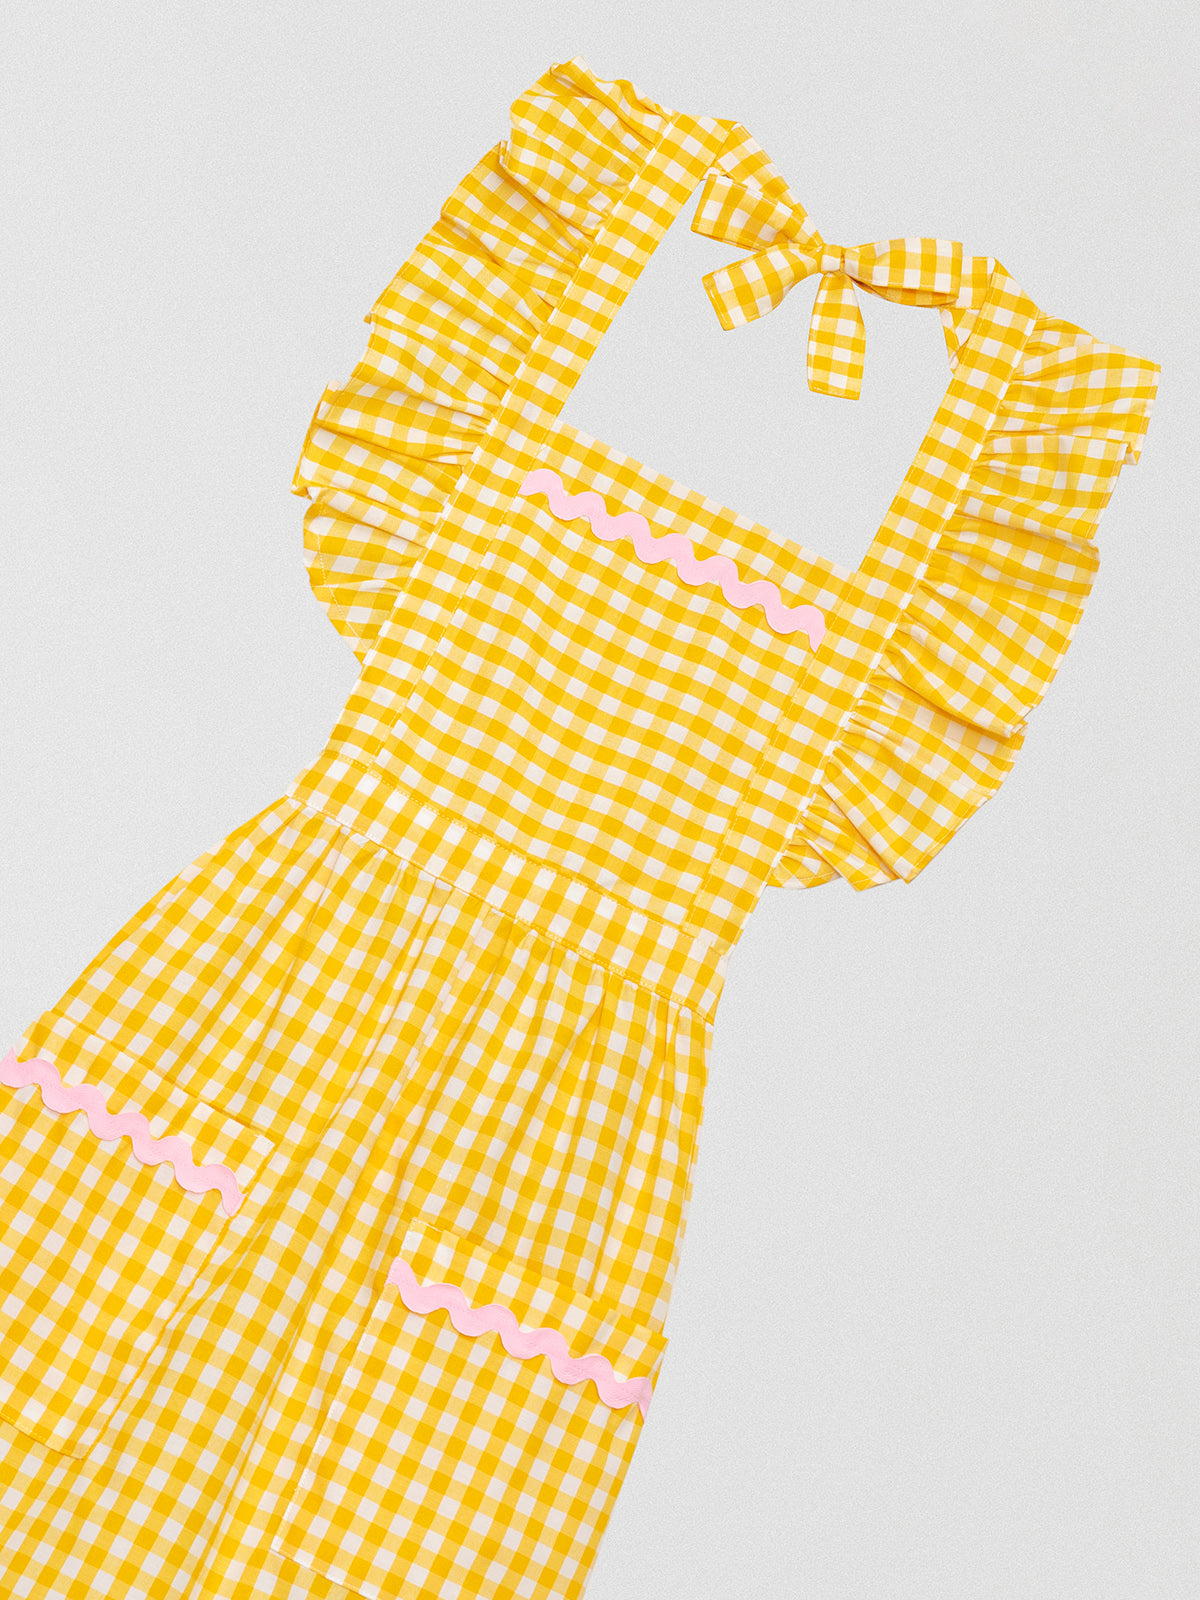 Yellow vichy checkered kitchen apron with ruffles and green details on pockets and skirt 